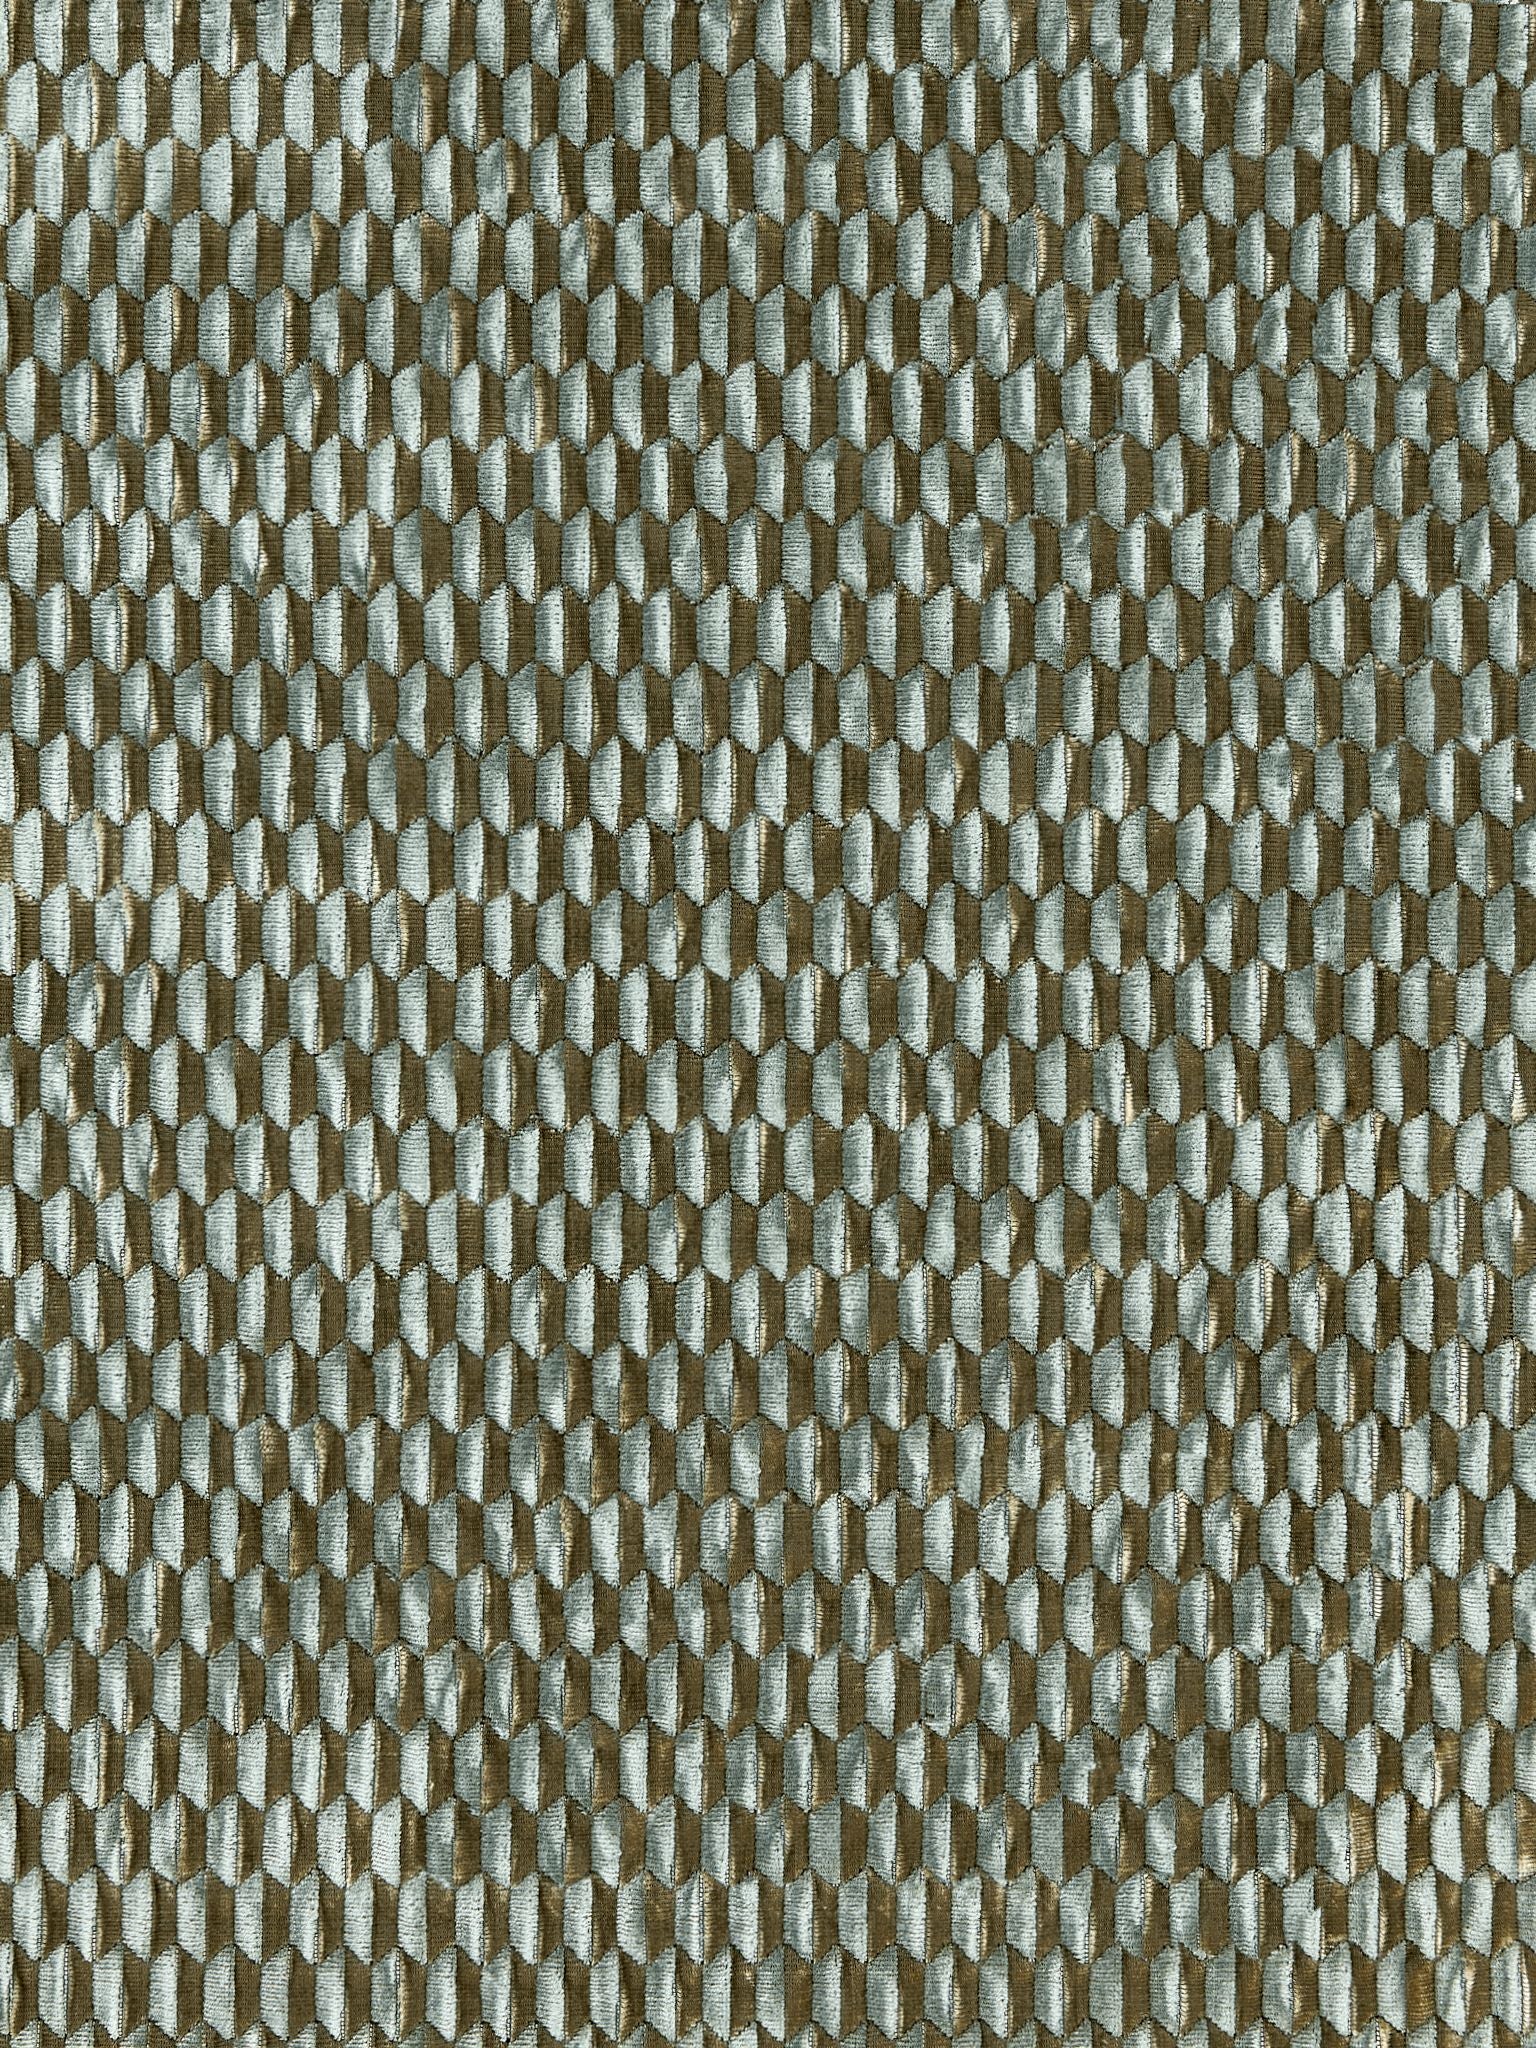 Allegra Velvet fabric in mineral color - pattern number SC 000227184 - by Scalamandre in the Scalamandre Fabrics Book 1 collection